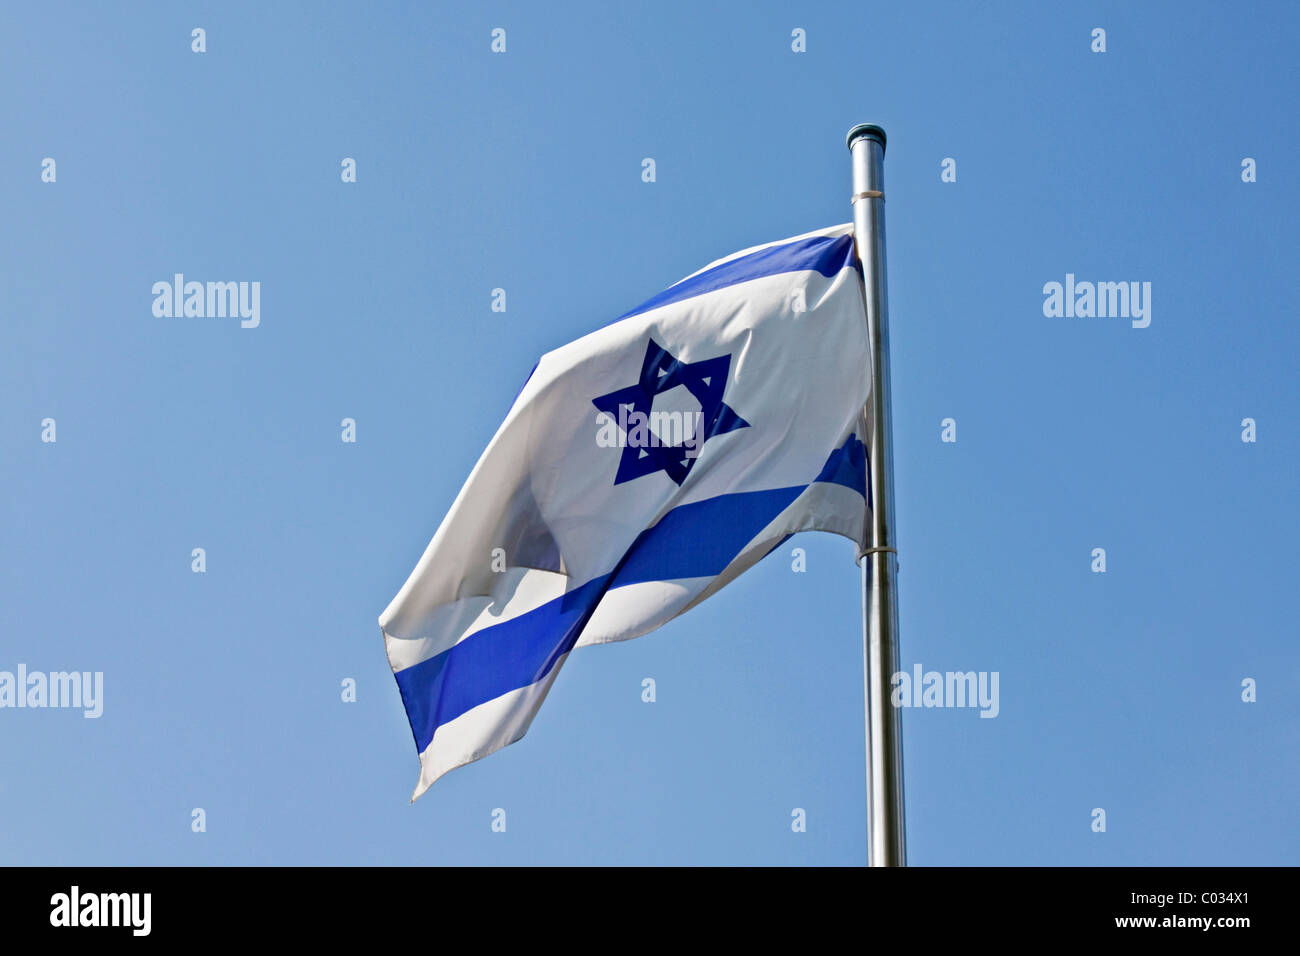 Flagge des Staates Israel Stockfoto